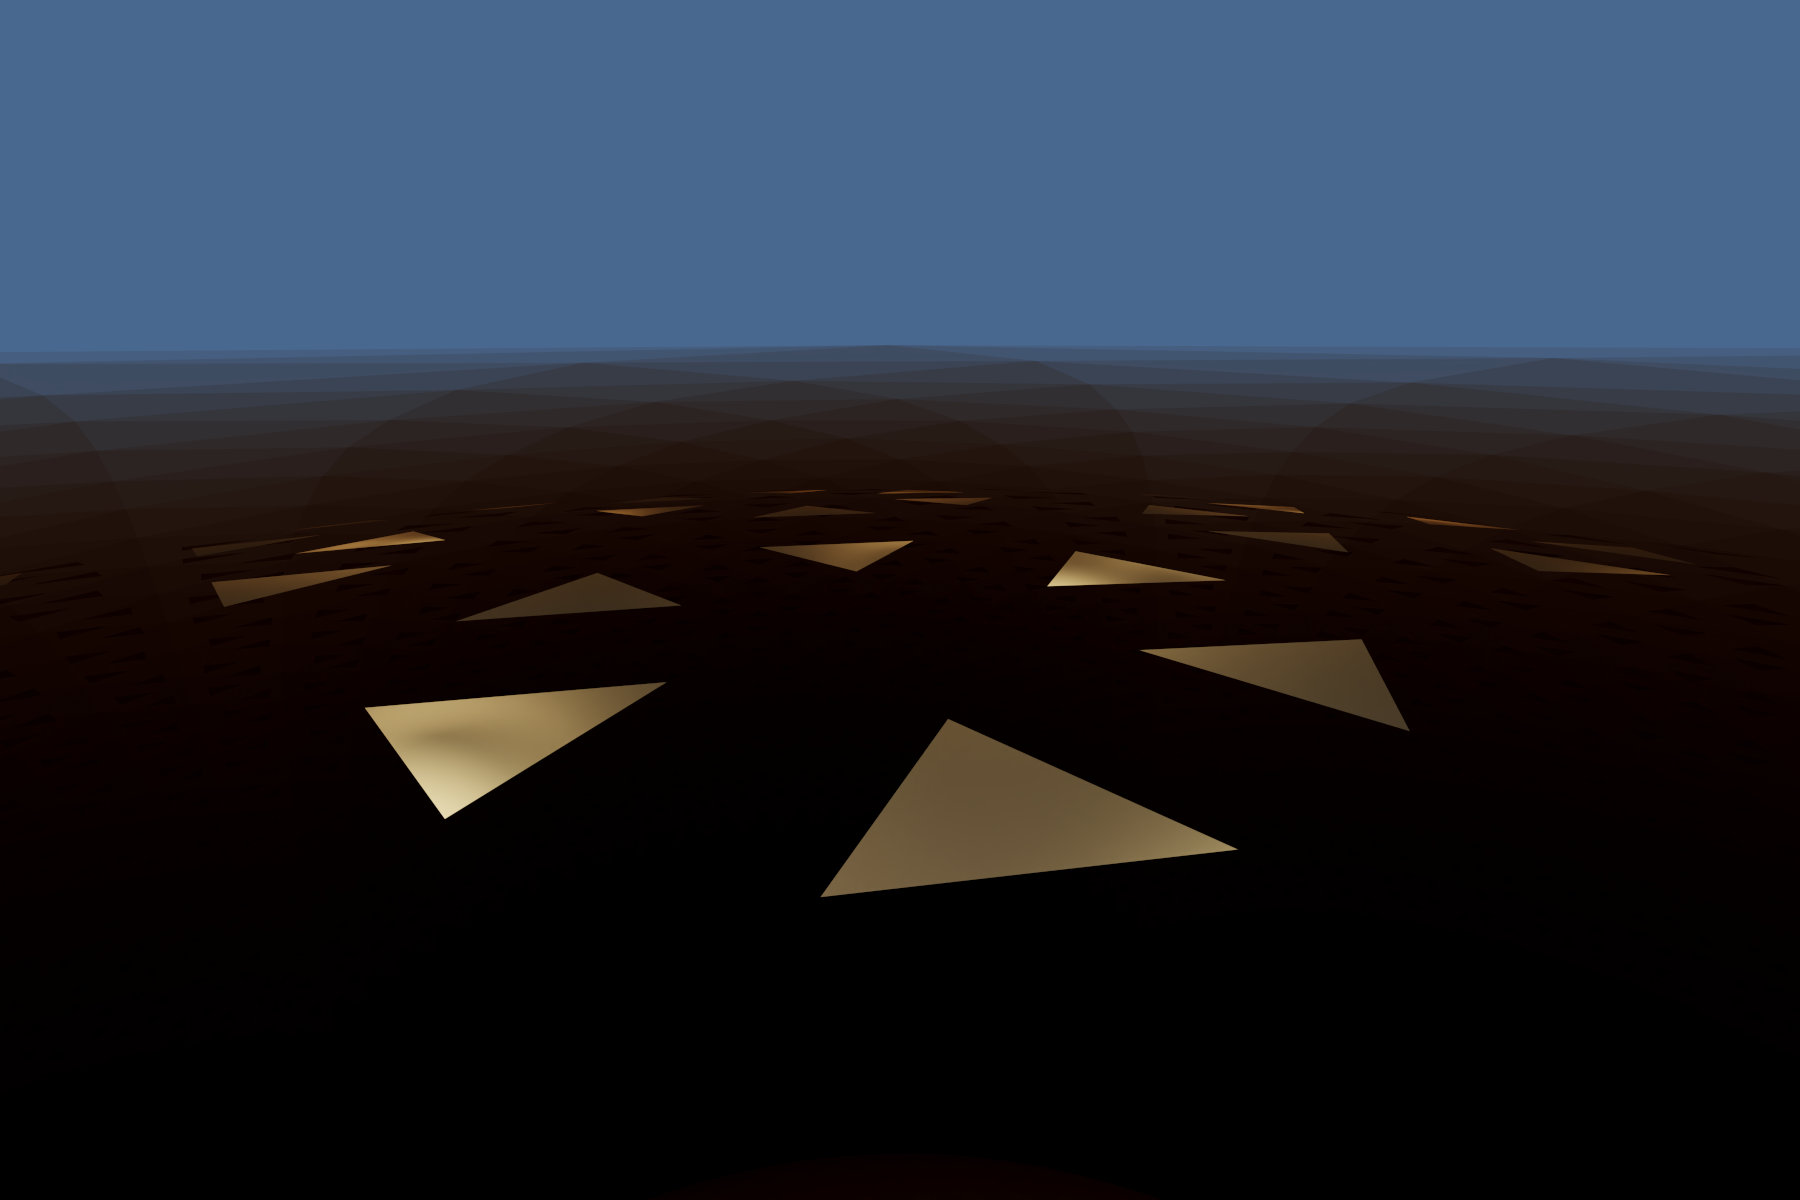 Virtual abstract scenery, Abstract digital art, Raytracing, Computer-rendered image, 2022. A golden triangle appears in numerous mirror images on a curved surface. The blue background suggests the impression of a water surface.